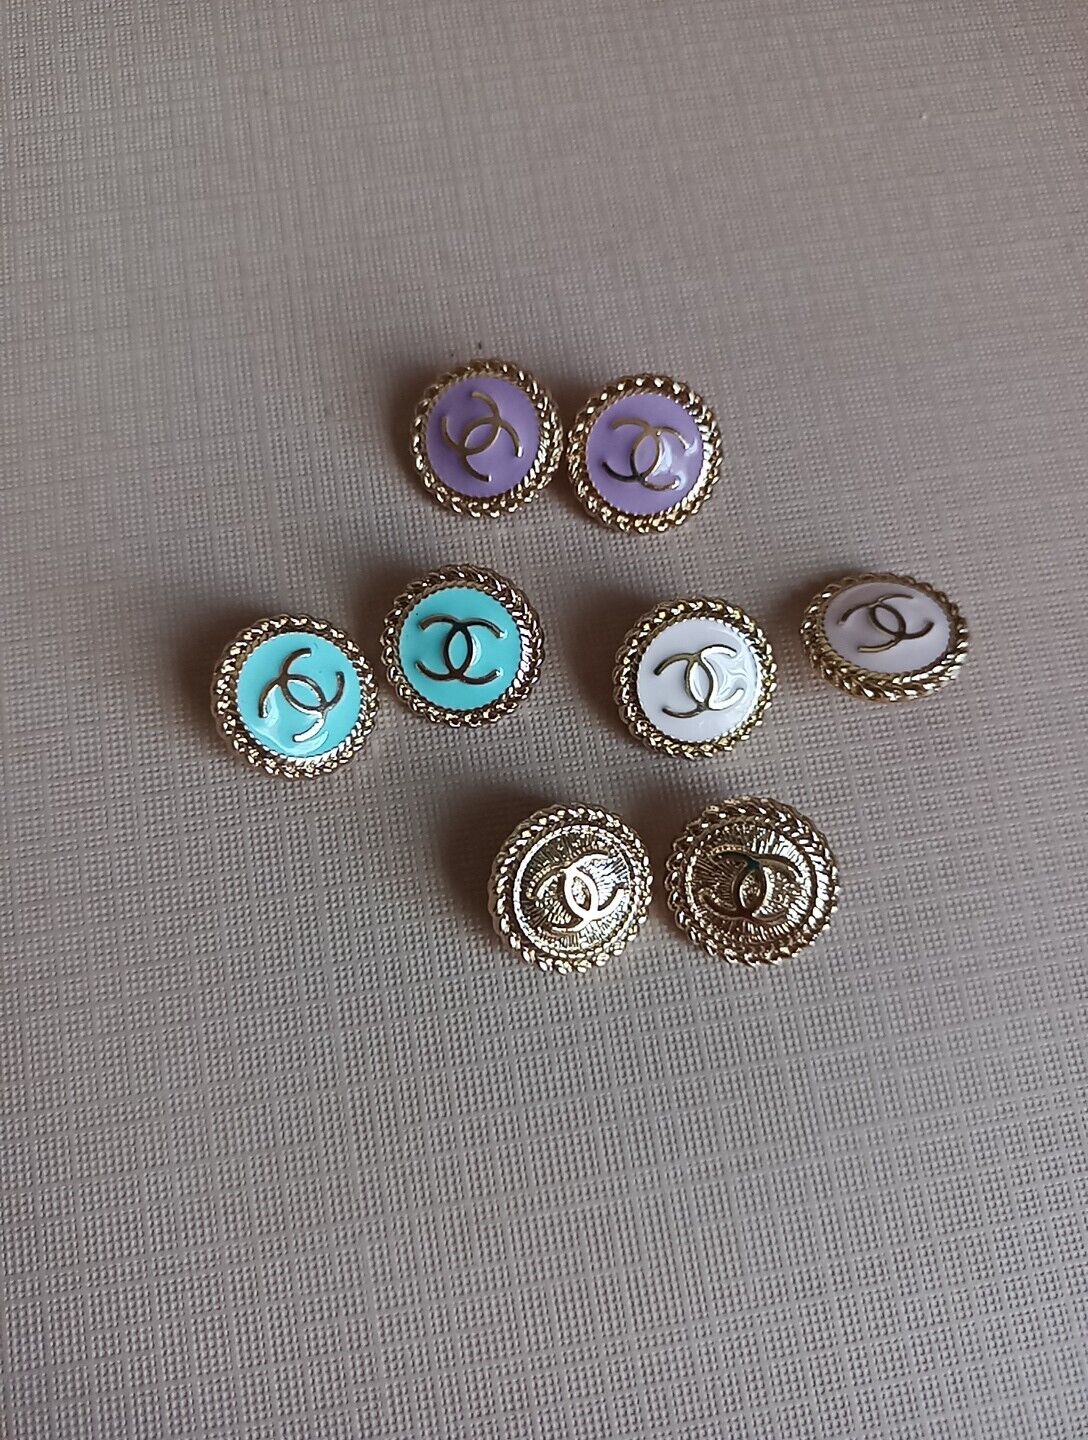 Lot Of 8 16mm Designer Button REPLACEMENT Chanel BUTTON